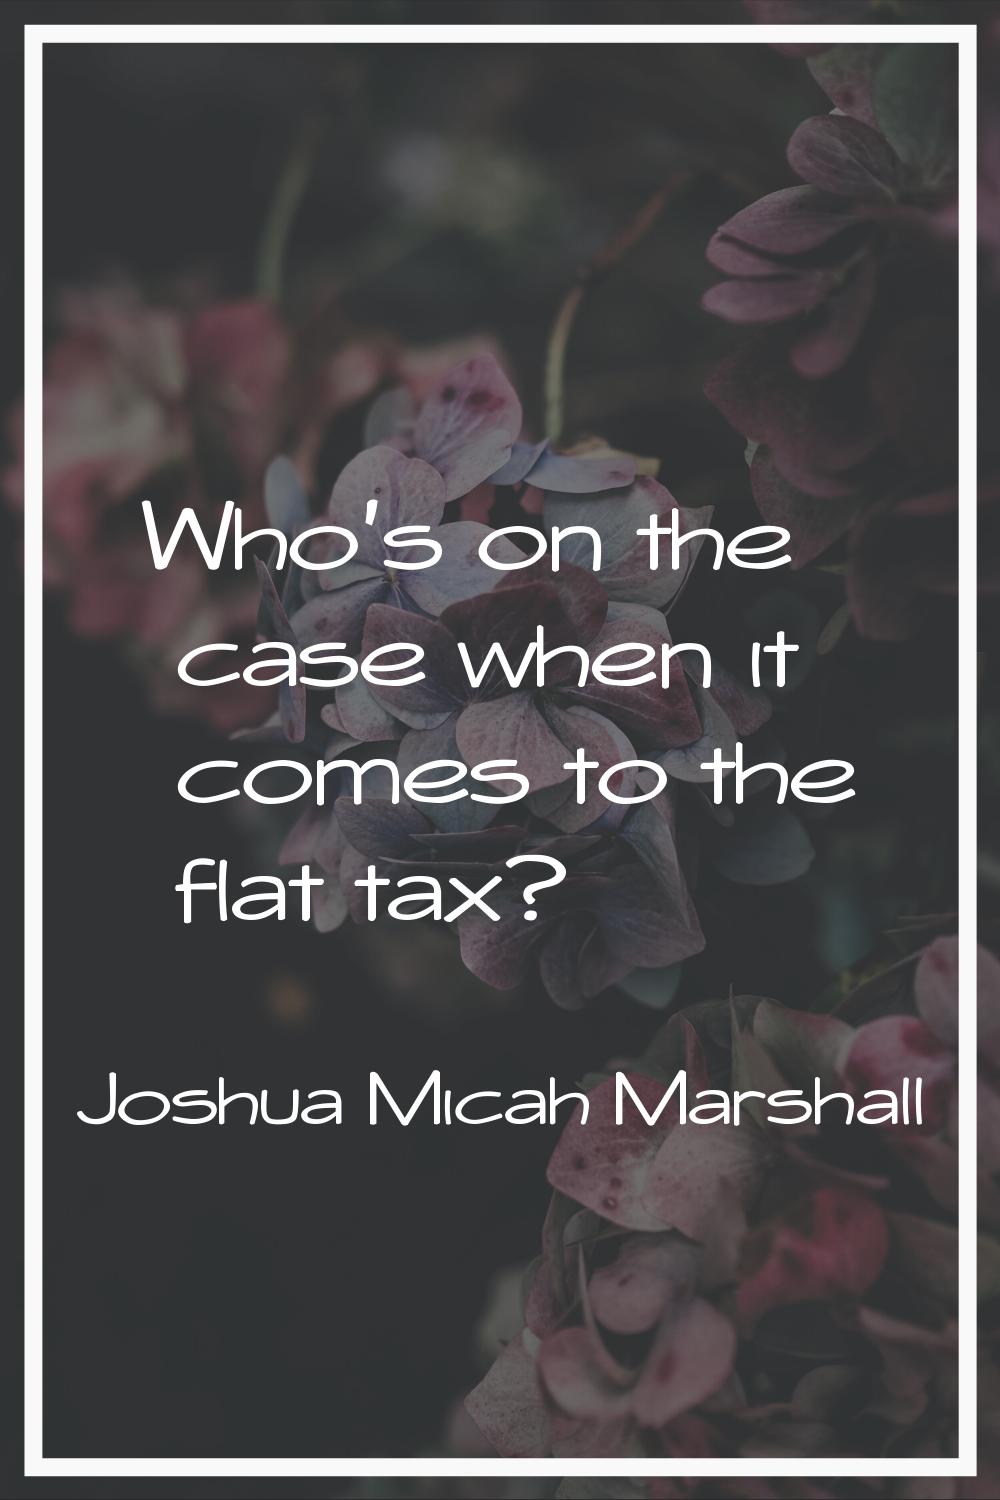 Who's on the case when it comes to the flat tax?